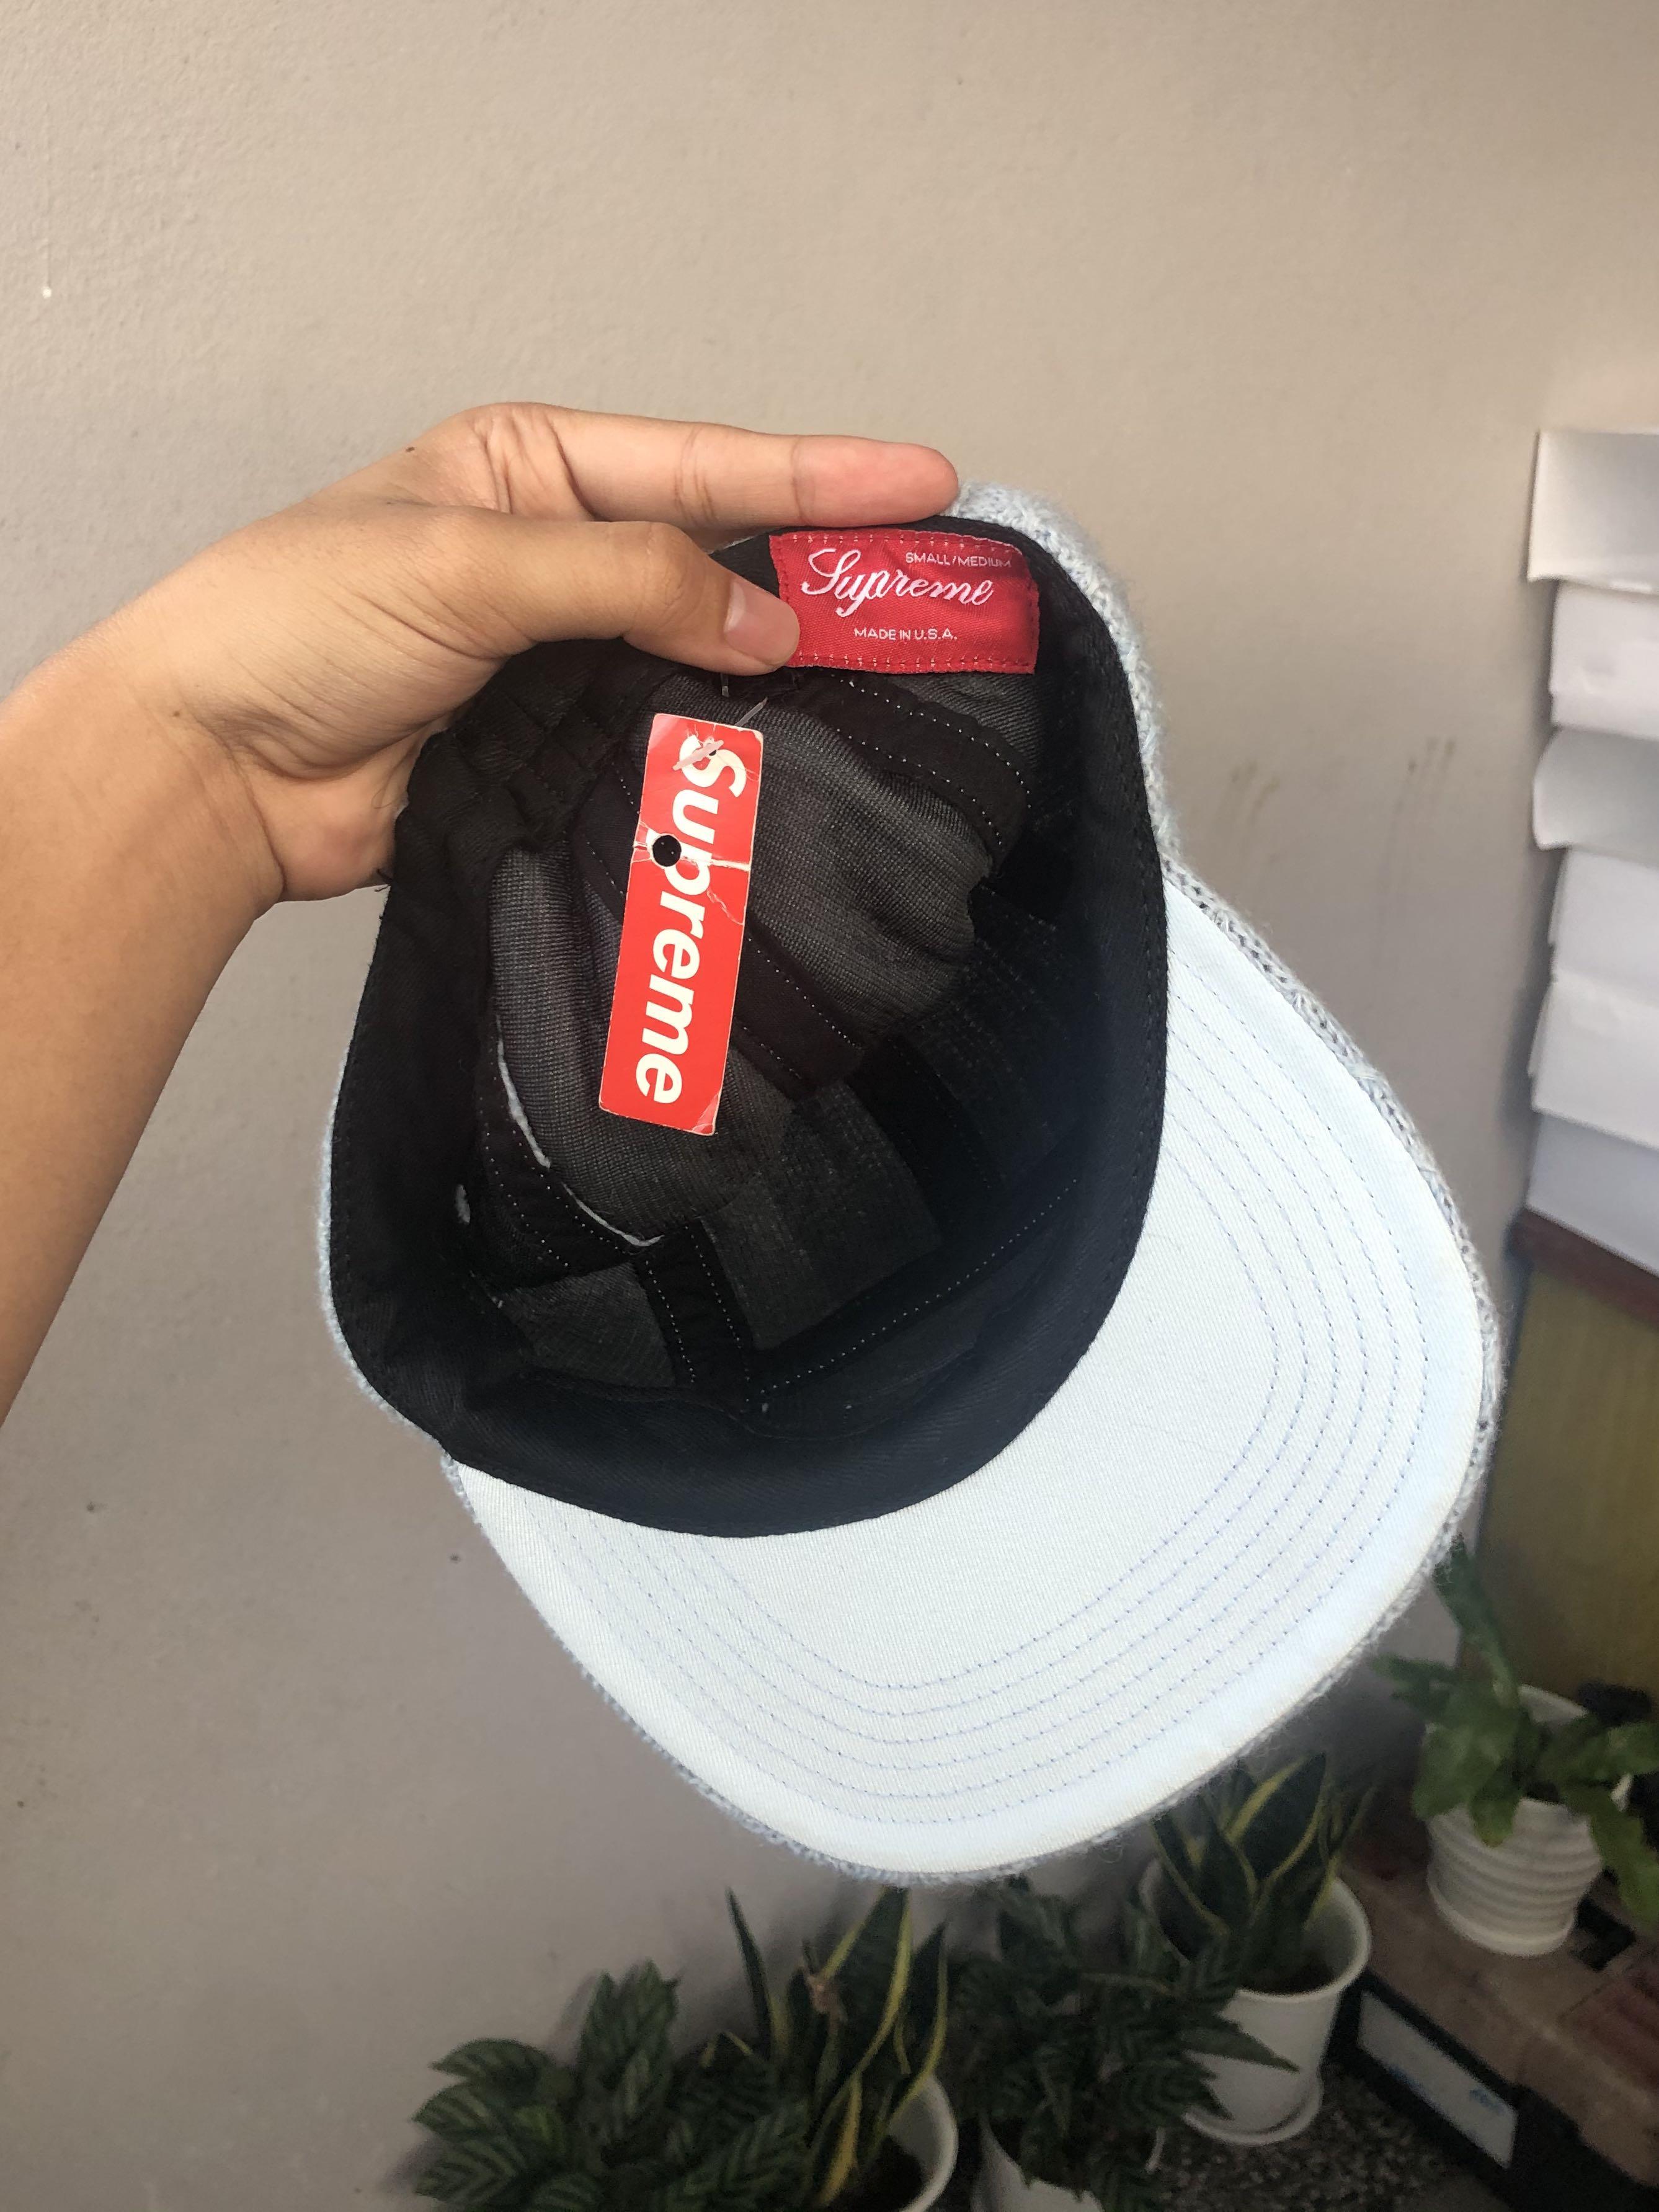 Supreme Fitted Cable Knit Camp Cap